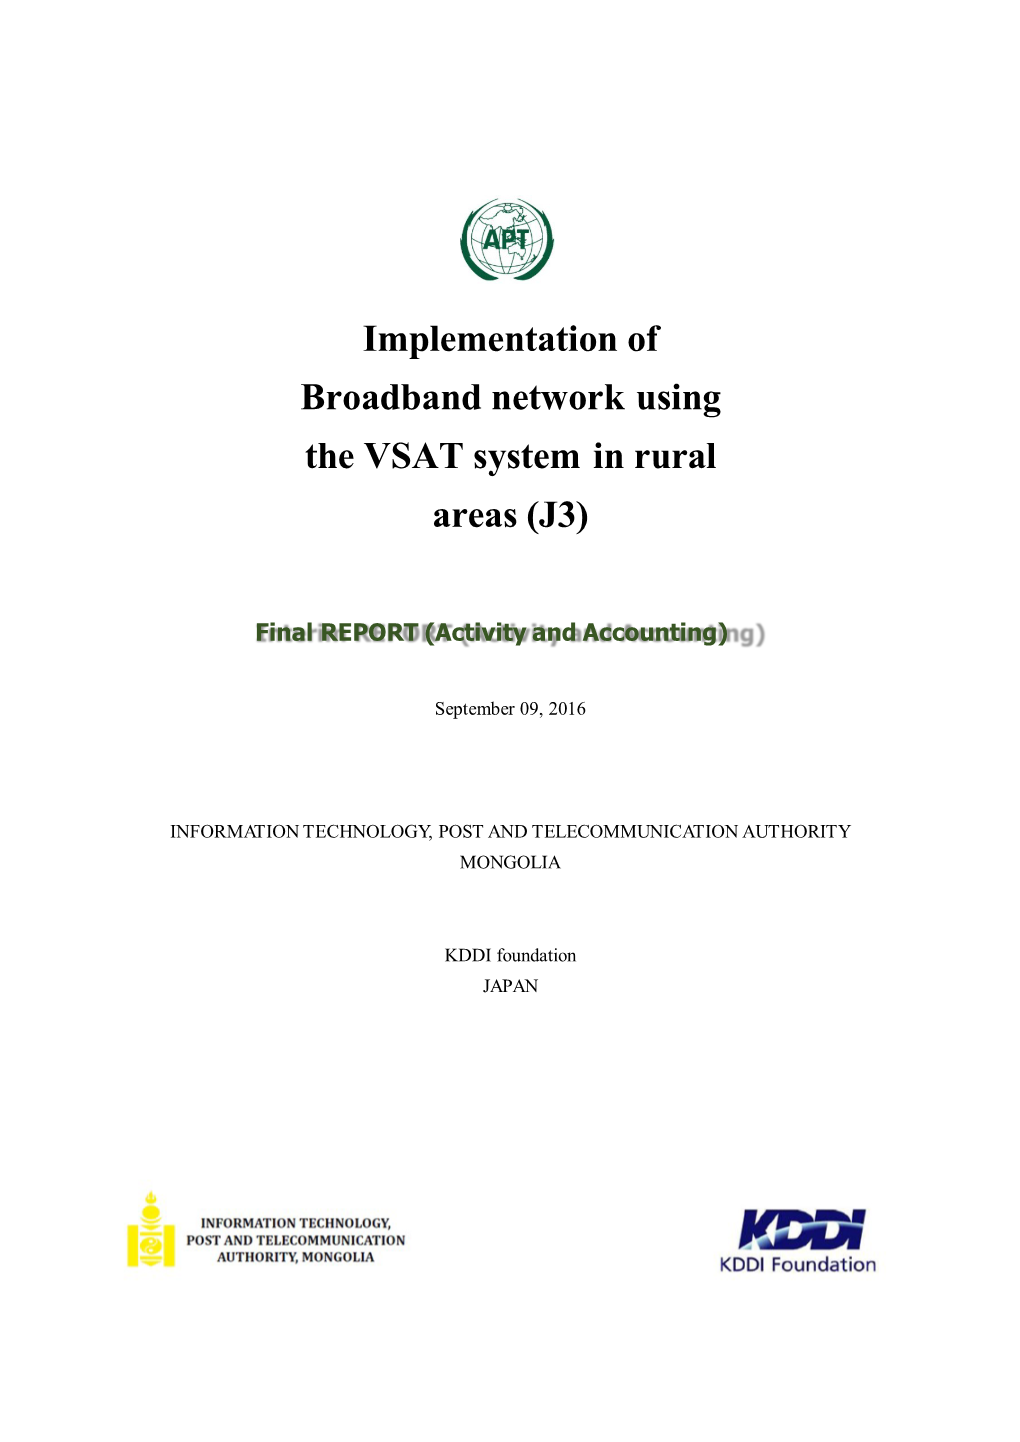 Implementation of Broadband Network Using the VSAT System in Rural Areas (J3)